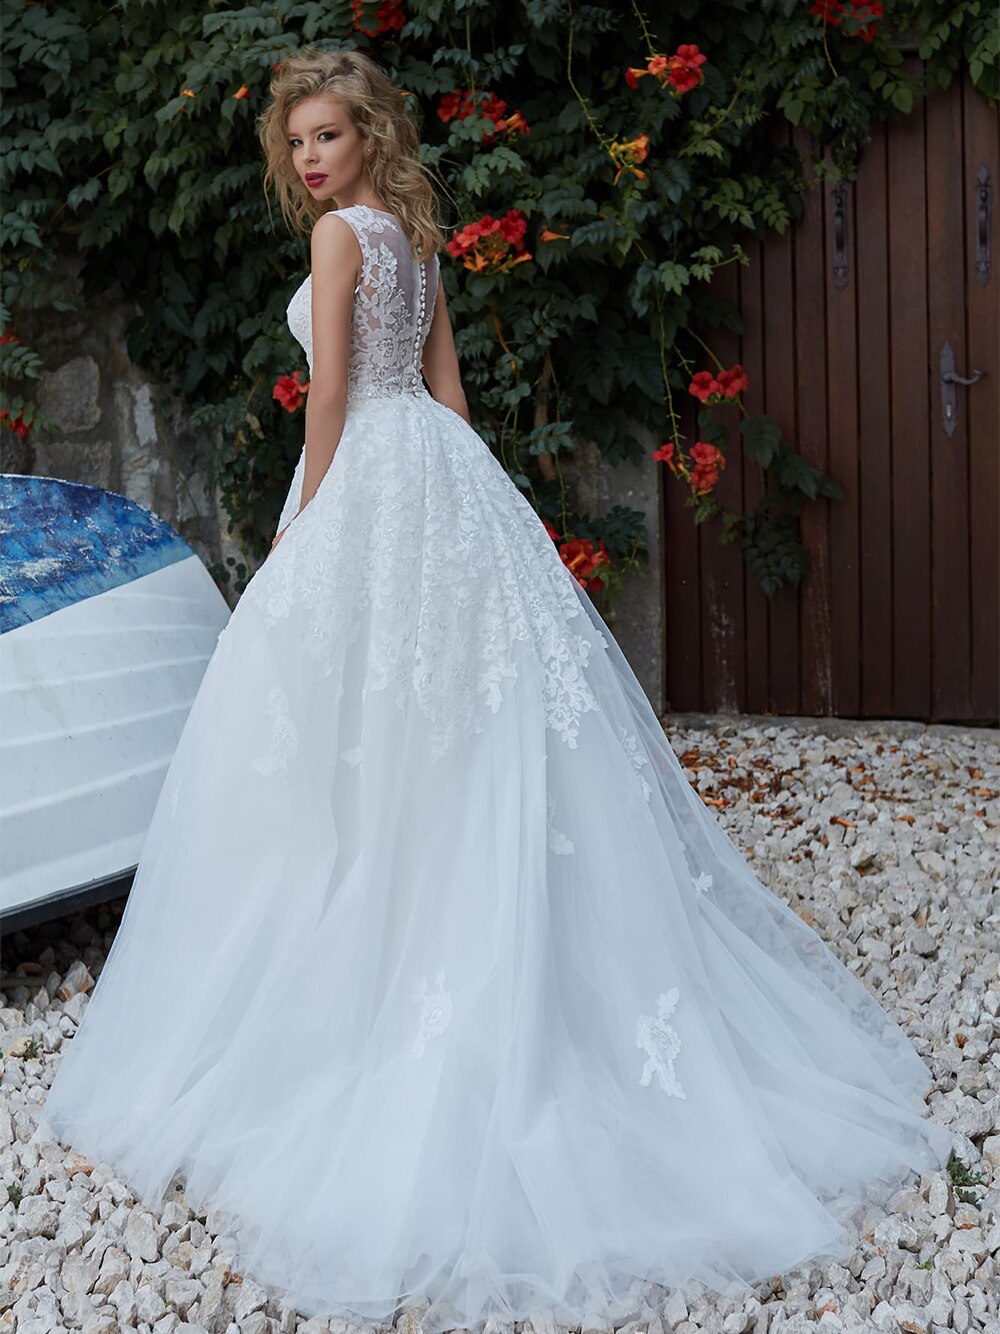 2021 New Illusion O Neck Off Shoulder Tulle A-Line Wedding Dresses Appliqued Pearls Sequined Floor Length Bridal Gowns - LiveTrendsX